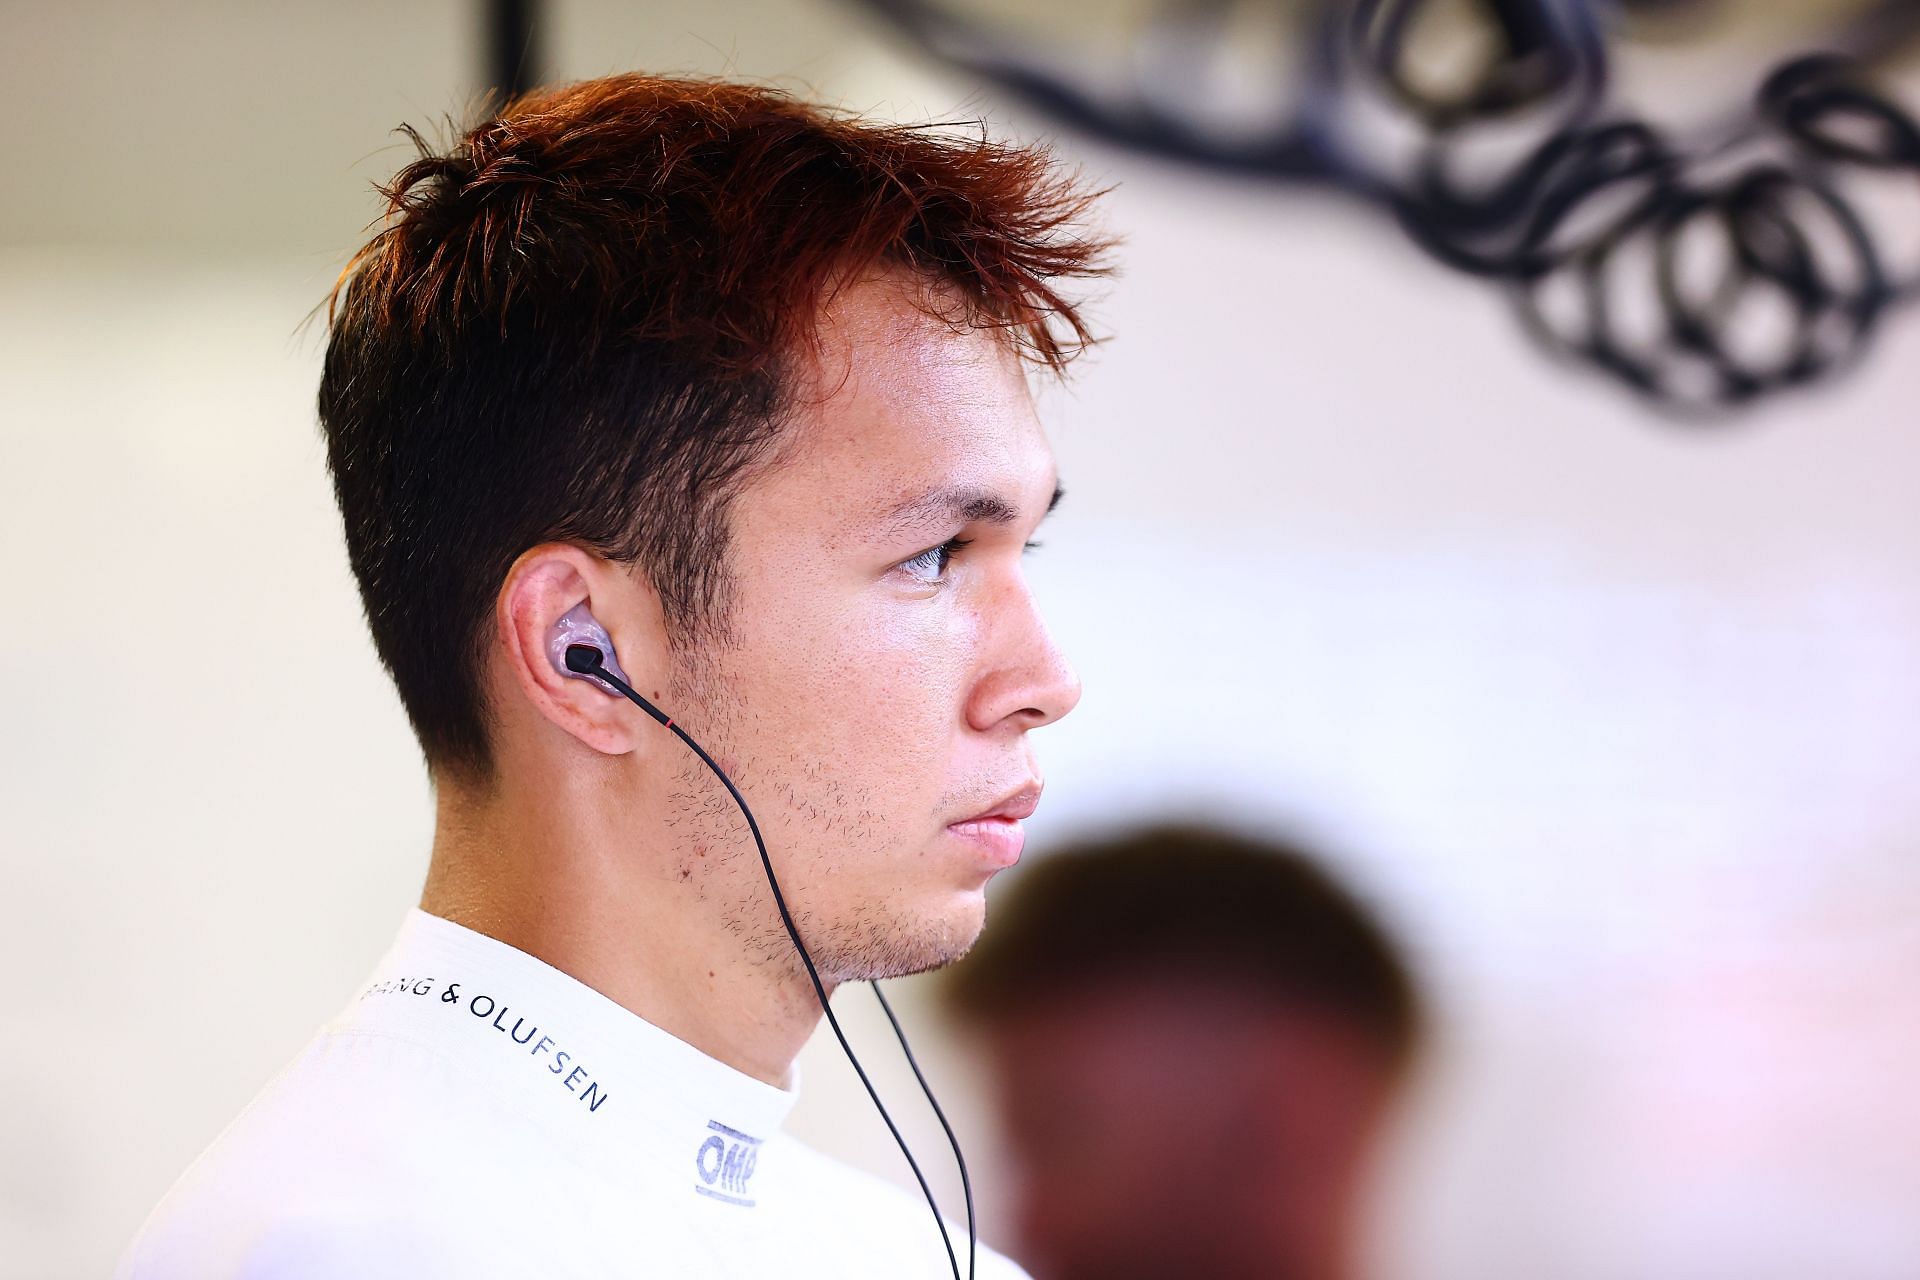 Alex Albon has been one of the standout performers of the 2022 F1 season